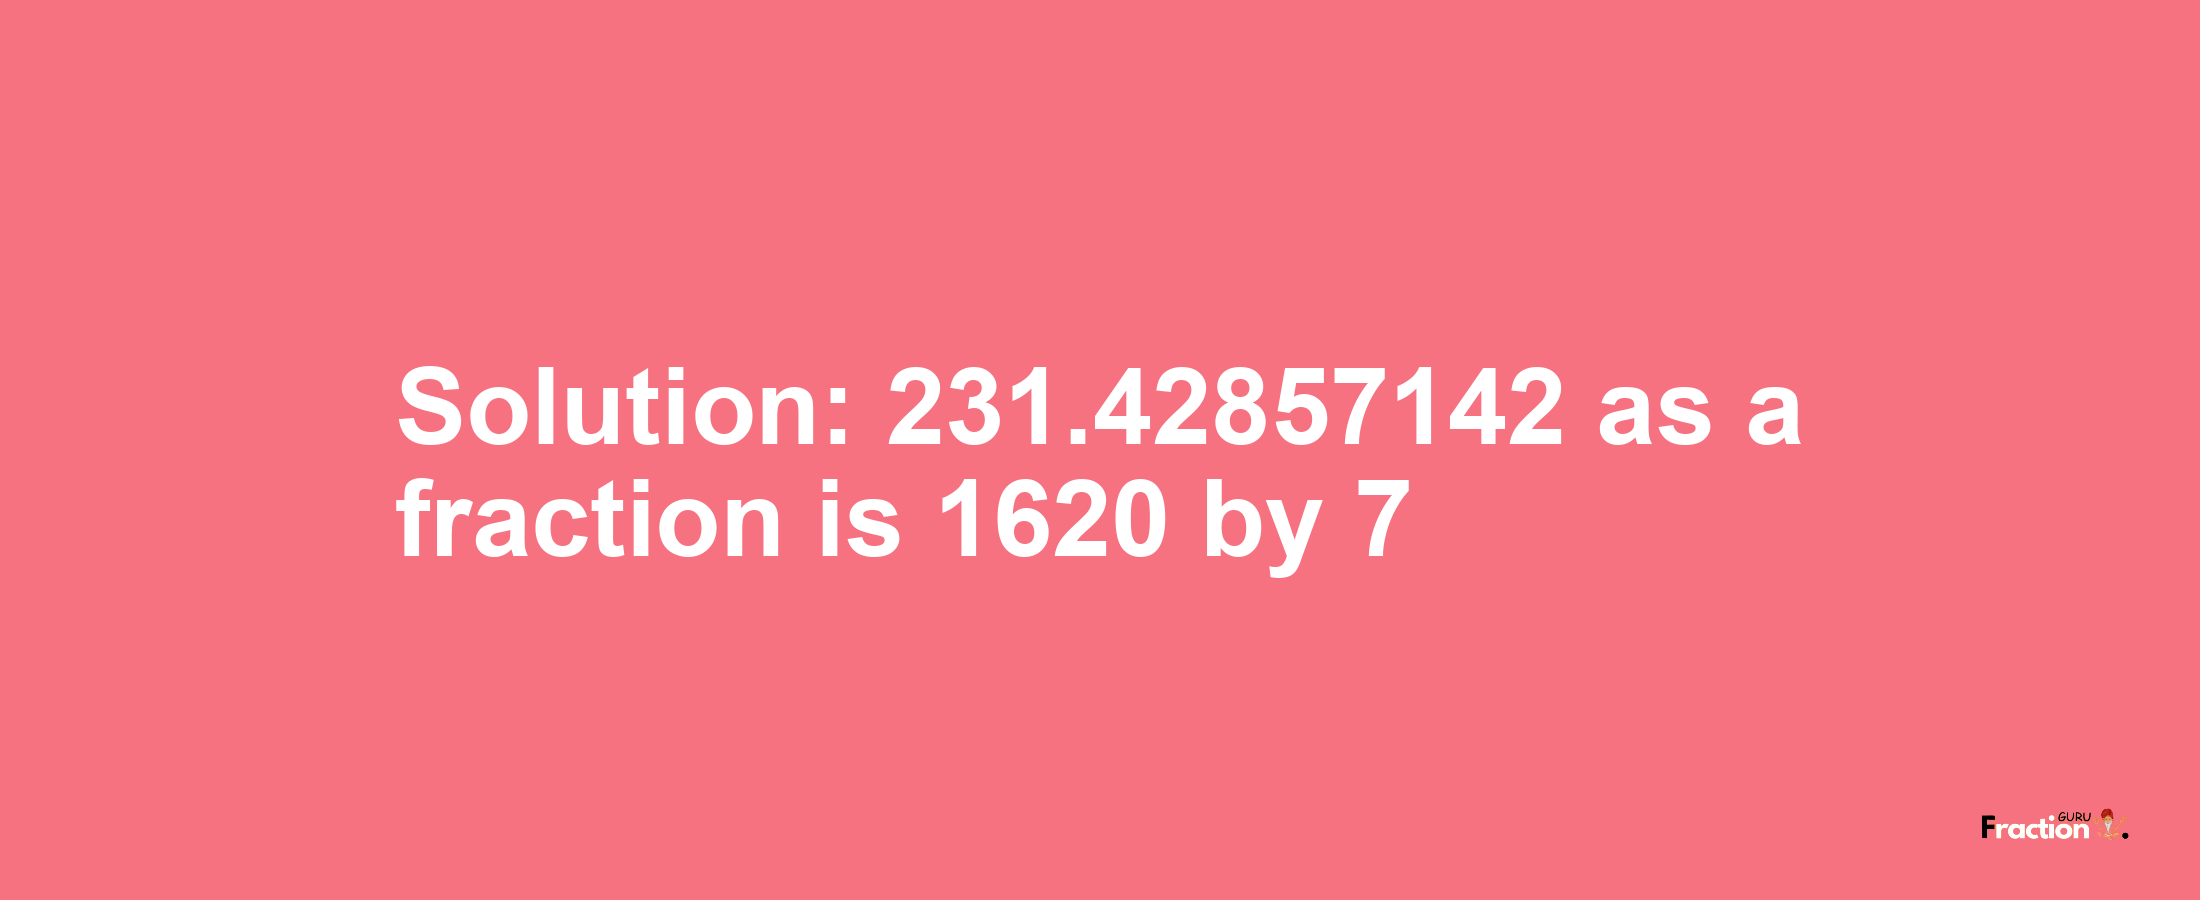 Solution:231.42857142 as a fraction is 1620/7